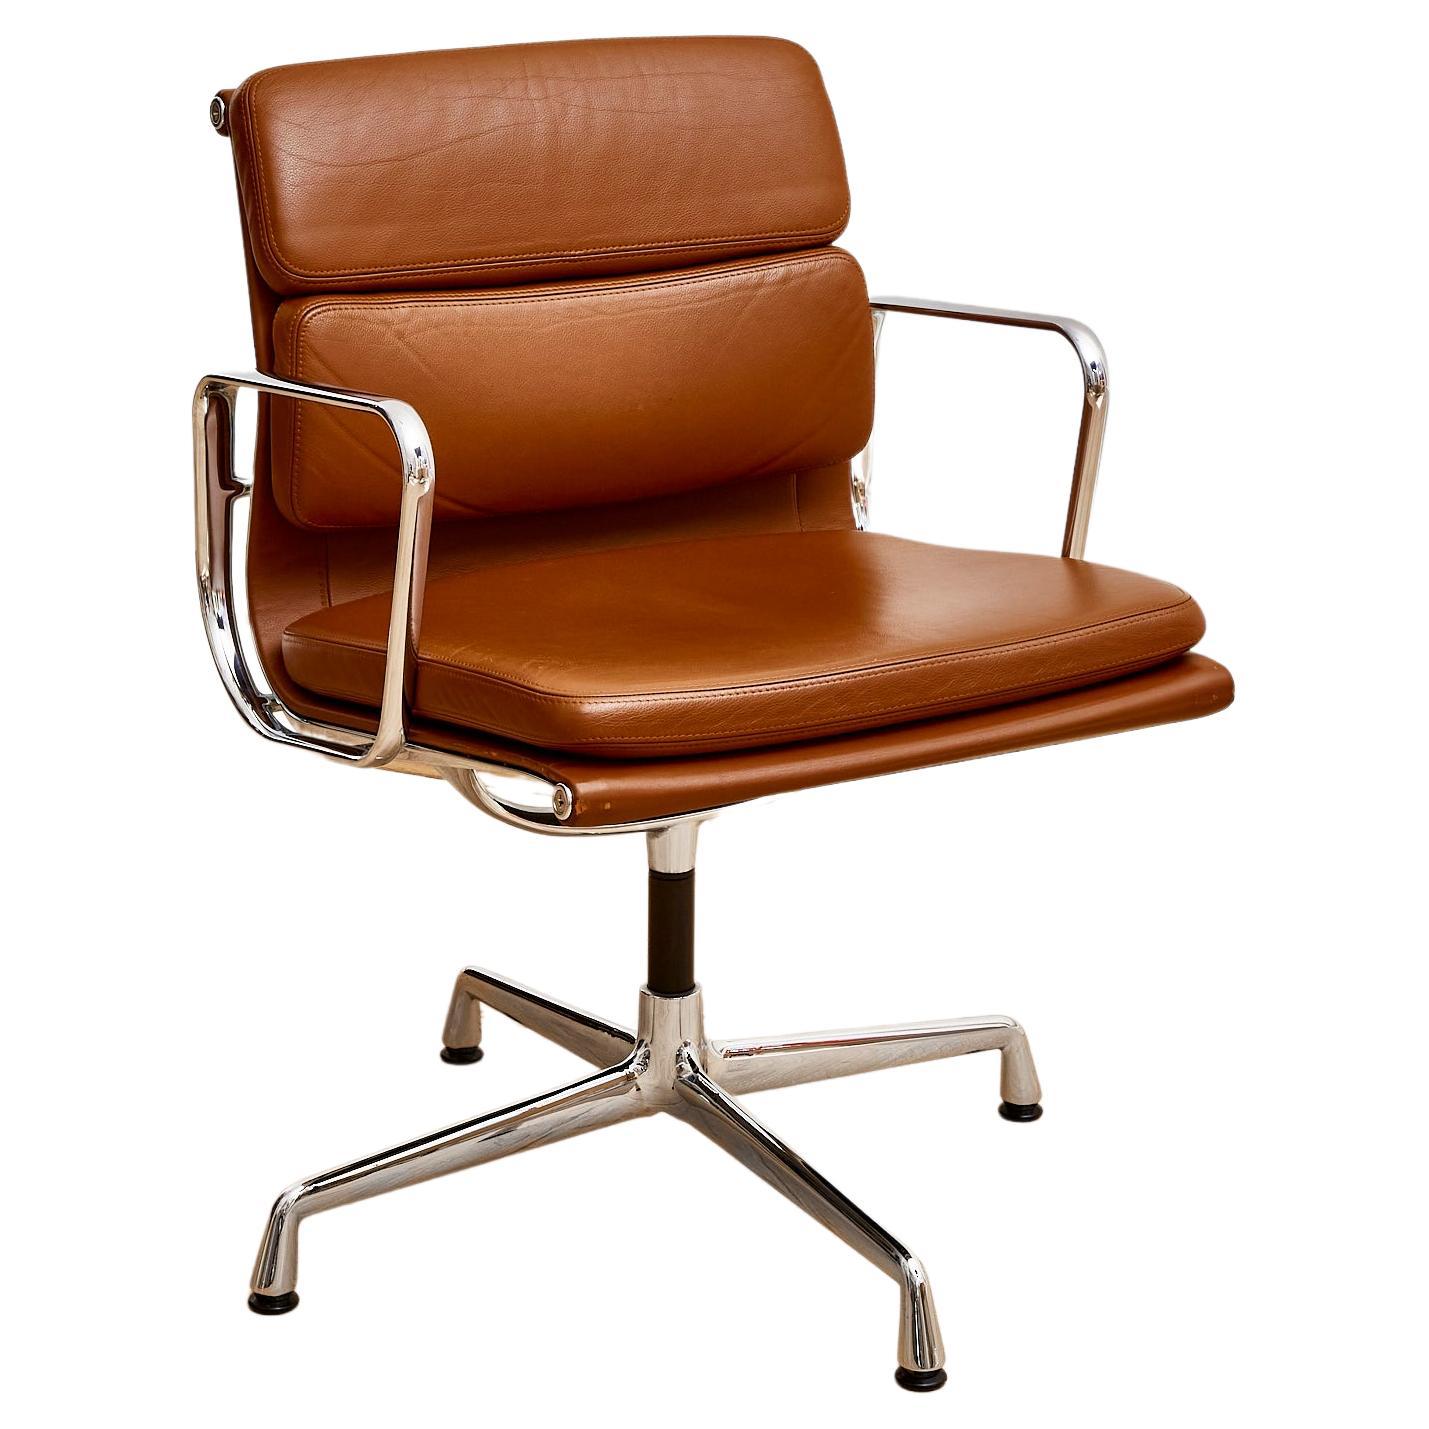 nhance your workspace with a touch of classic elegance and exceptional comfort with a Charles and Ray Eames EA 208 Soft Pad Office Chair by Vitra, featuring a timeless and Iconic design that seamlessly blends style and functionality.

Produced in